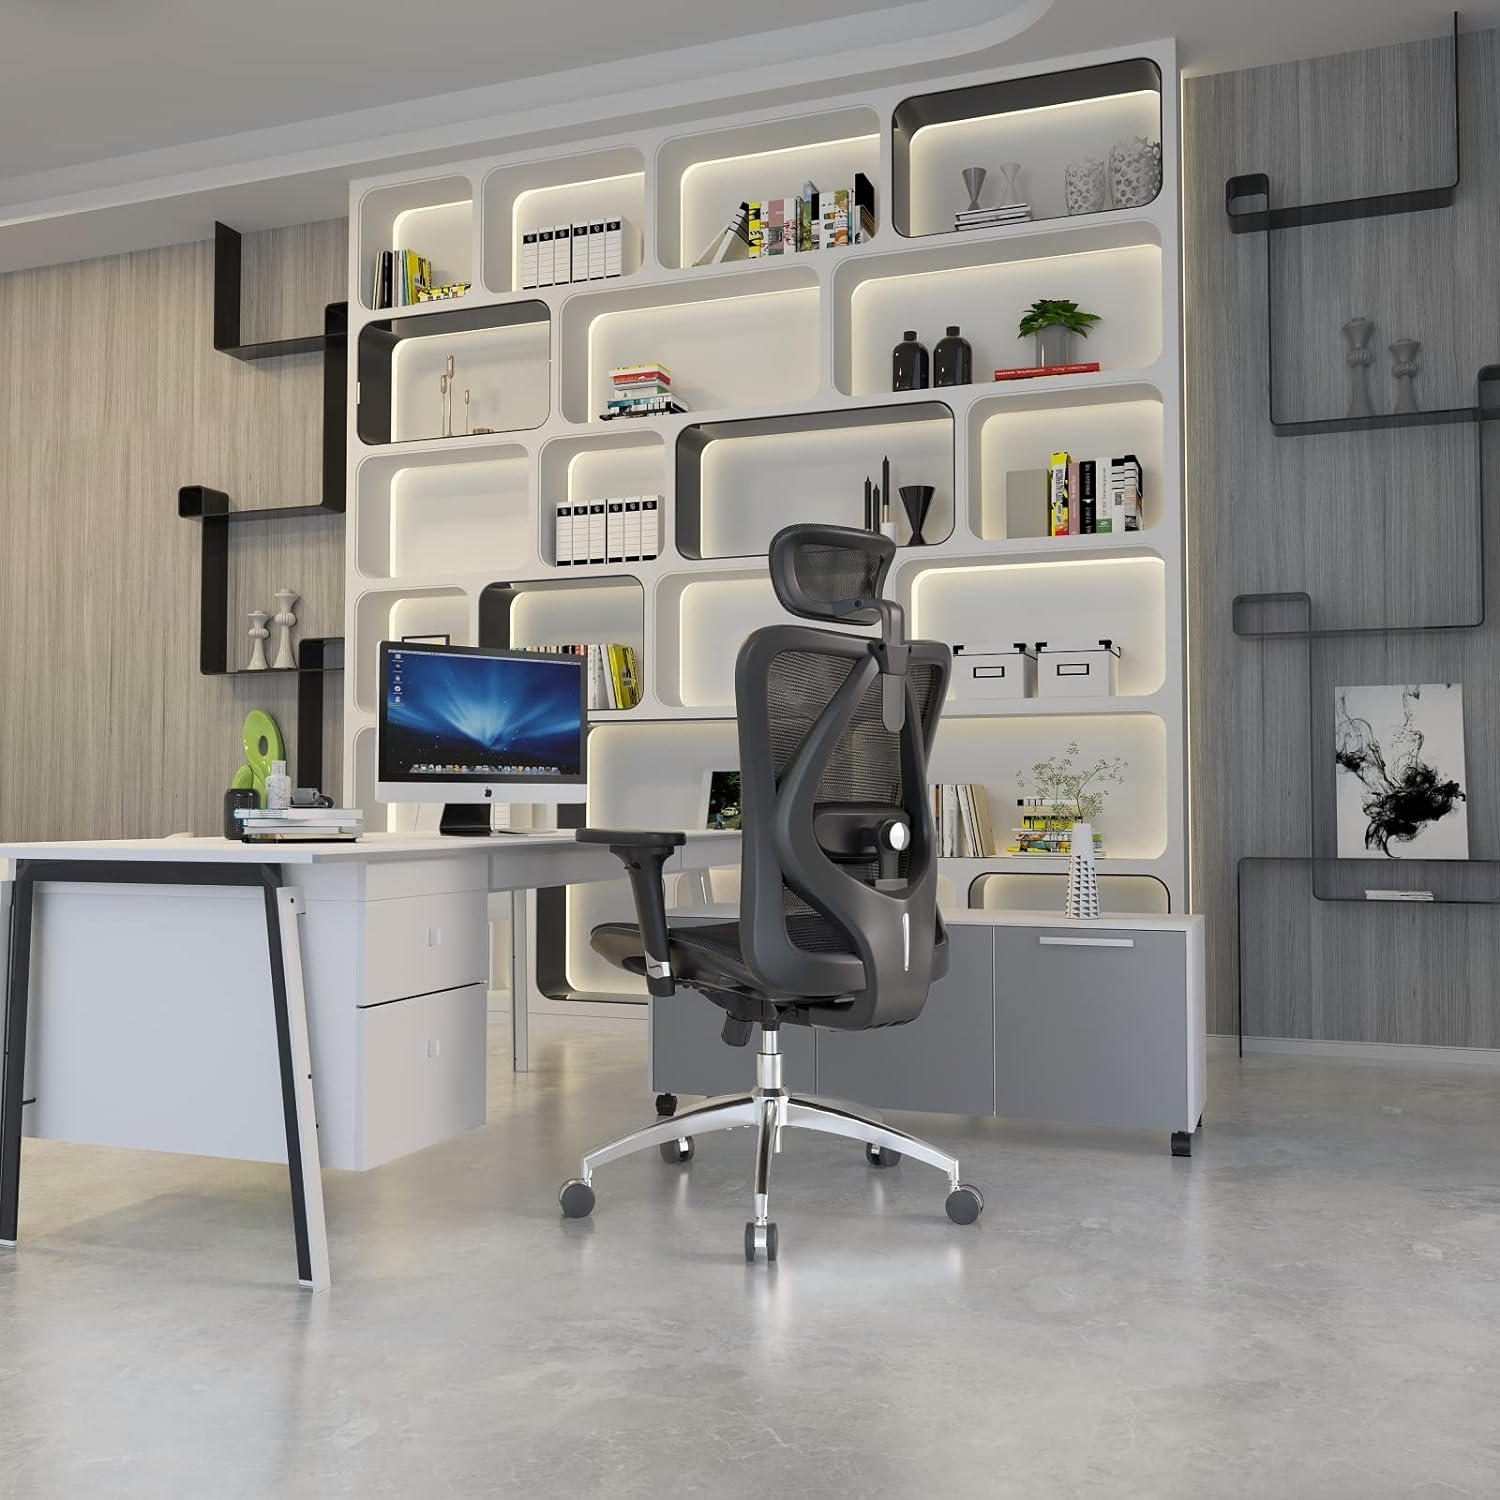 HOLLUDLE Ergonomic Office Chair with Adaptive Backrest, High Back